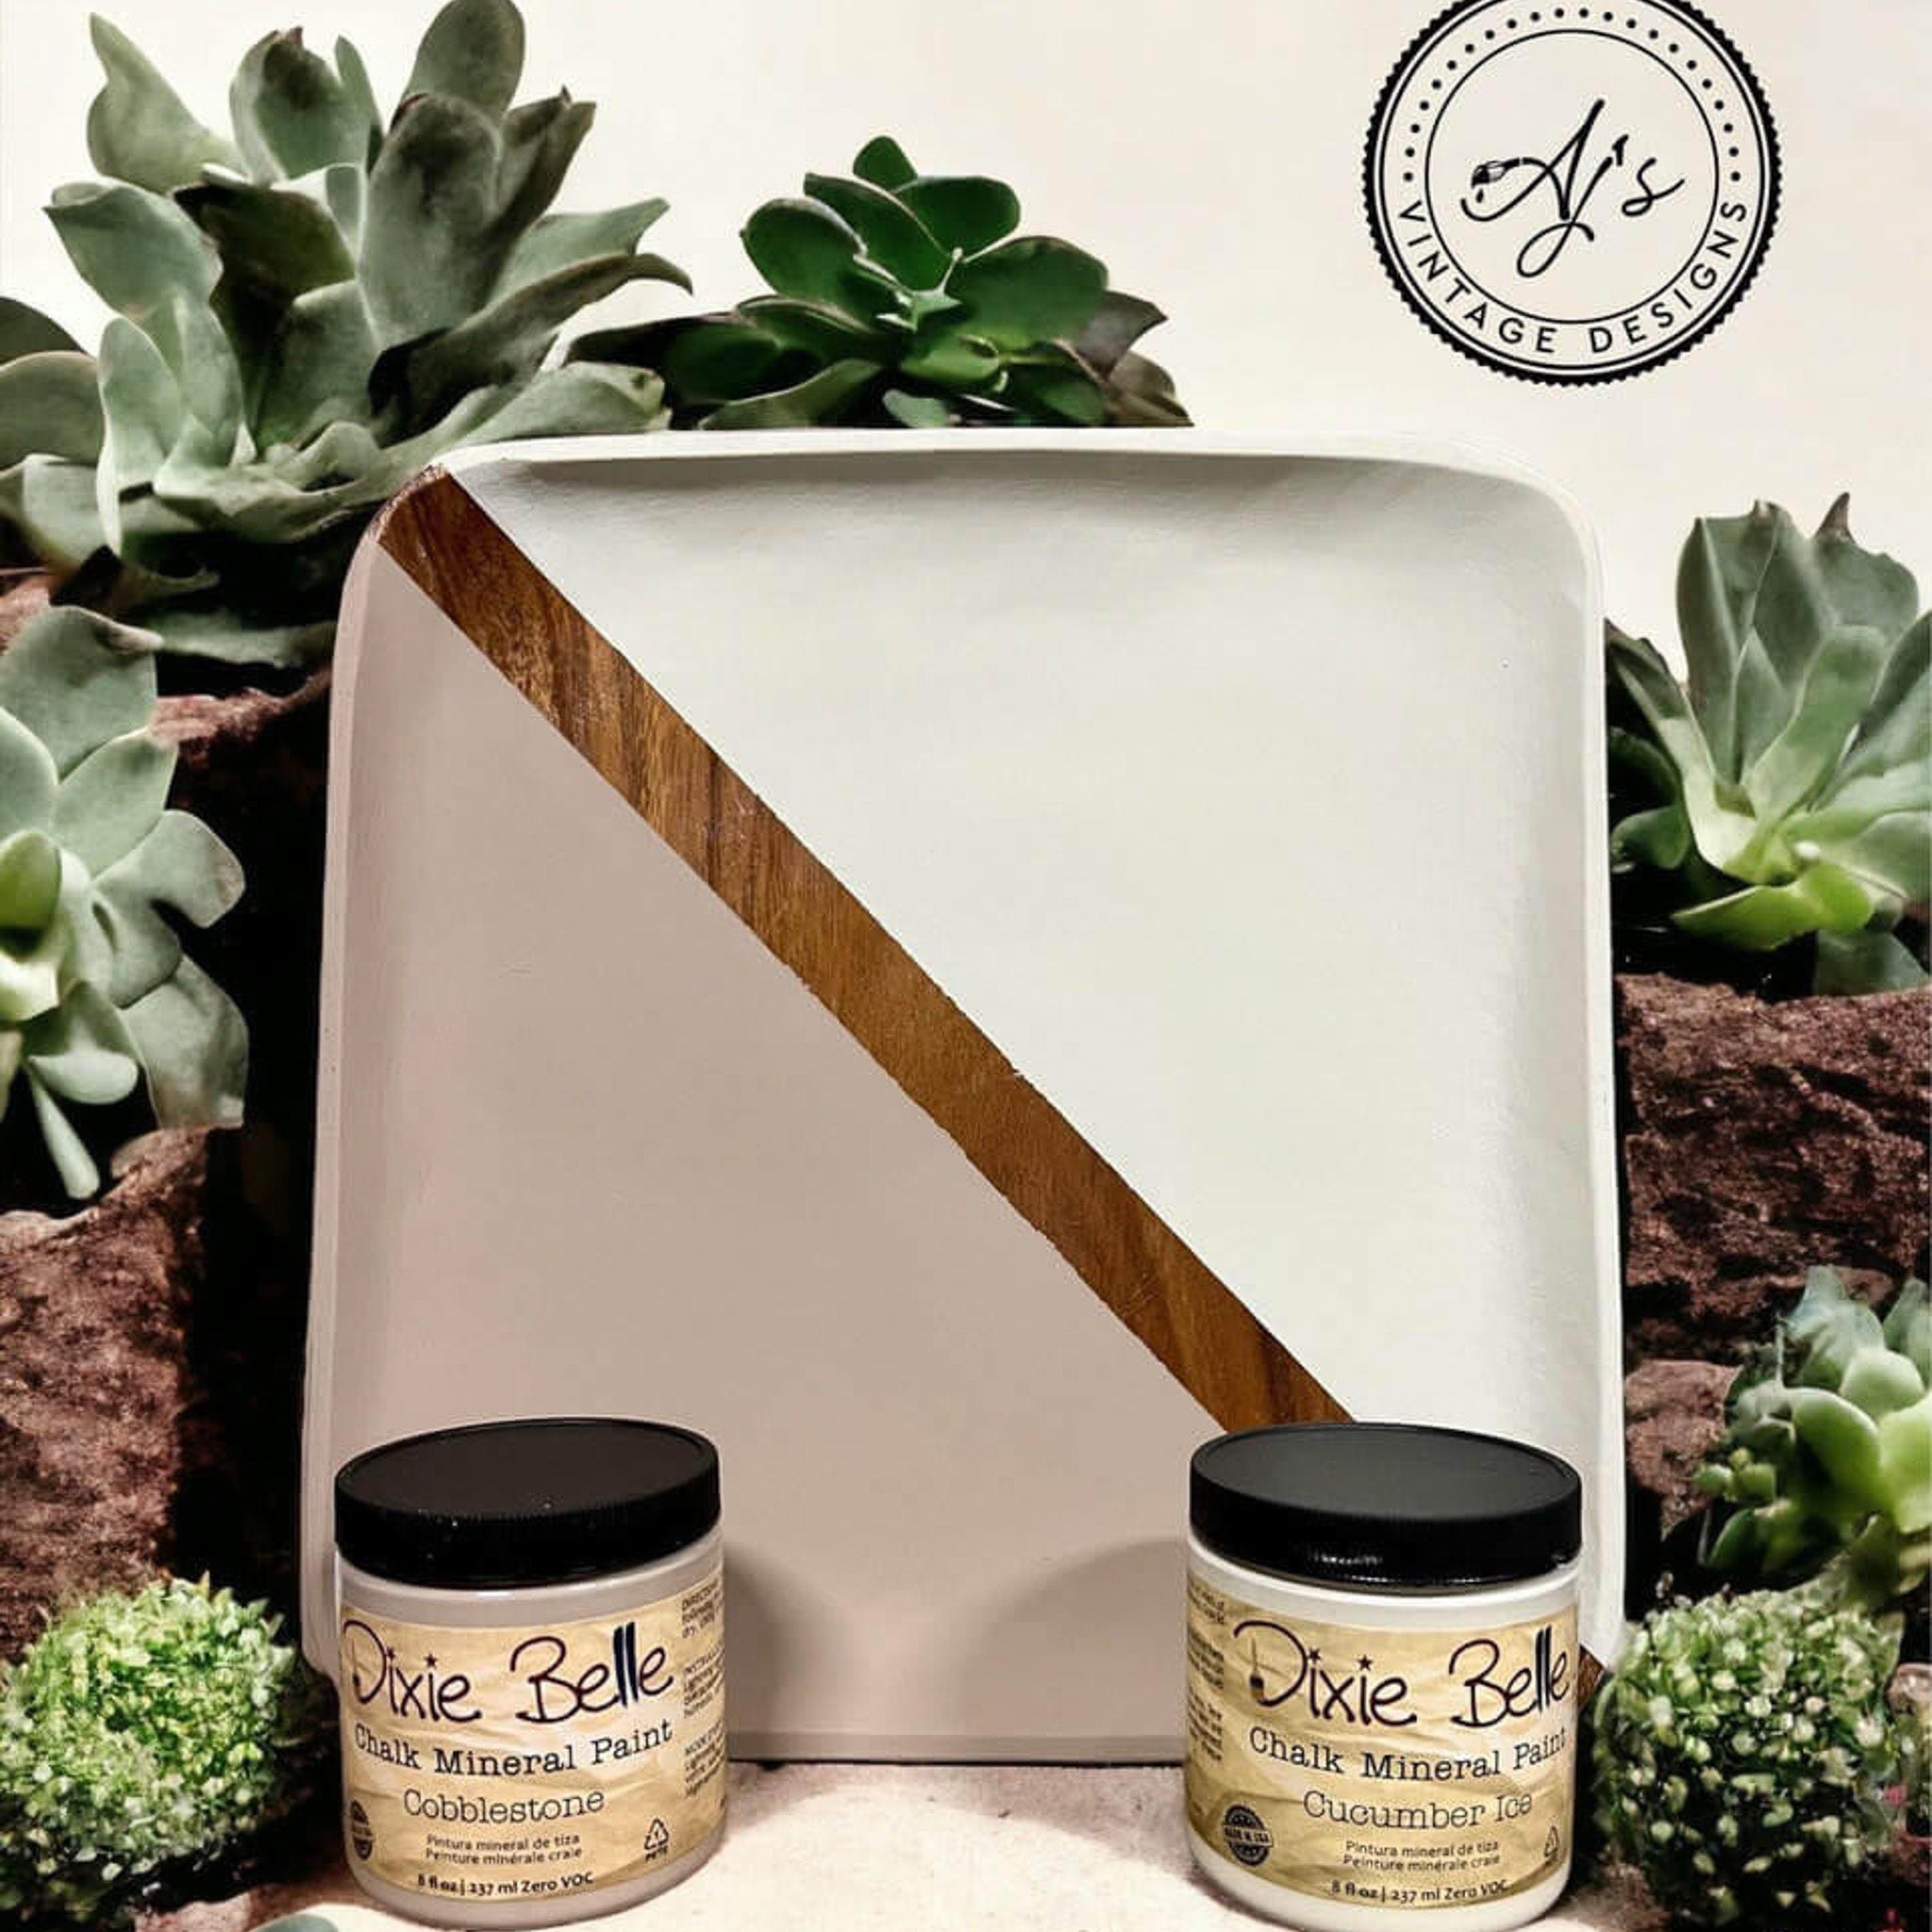 A square wood tray refurbished by Aj's Vintage Design is painted diagonally in Dixie Belle's Cobblestone chalk mineral paint on the bottom left, and Cucumber Ice chalk mineral paint on the top right with a natural wood stripe separating them. The tray is surrounded by green succulents.